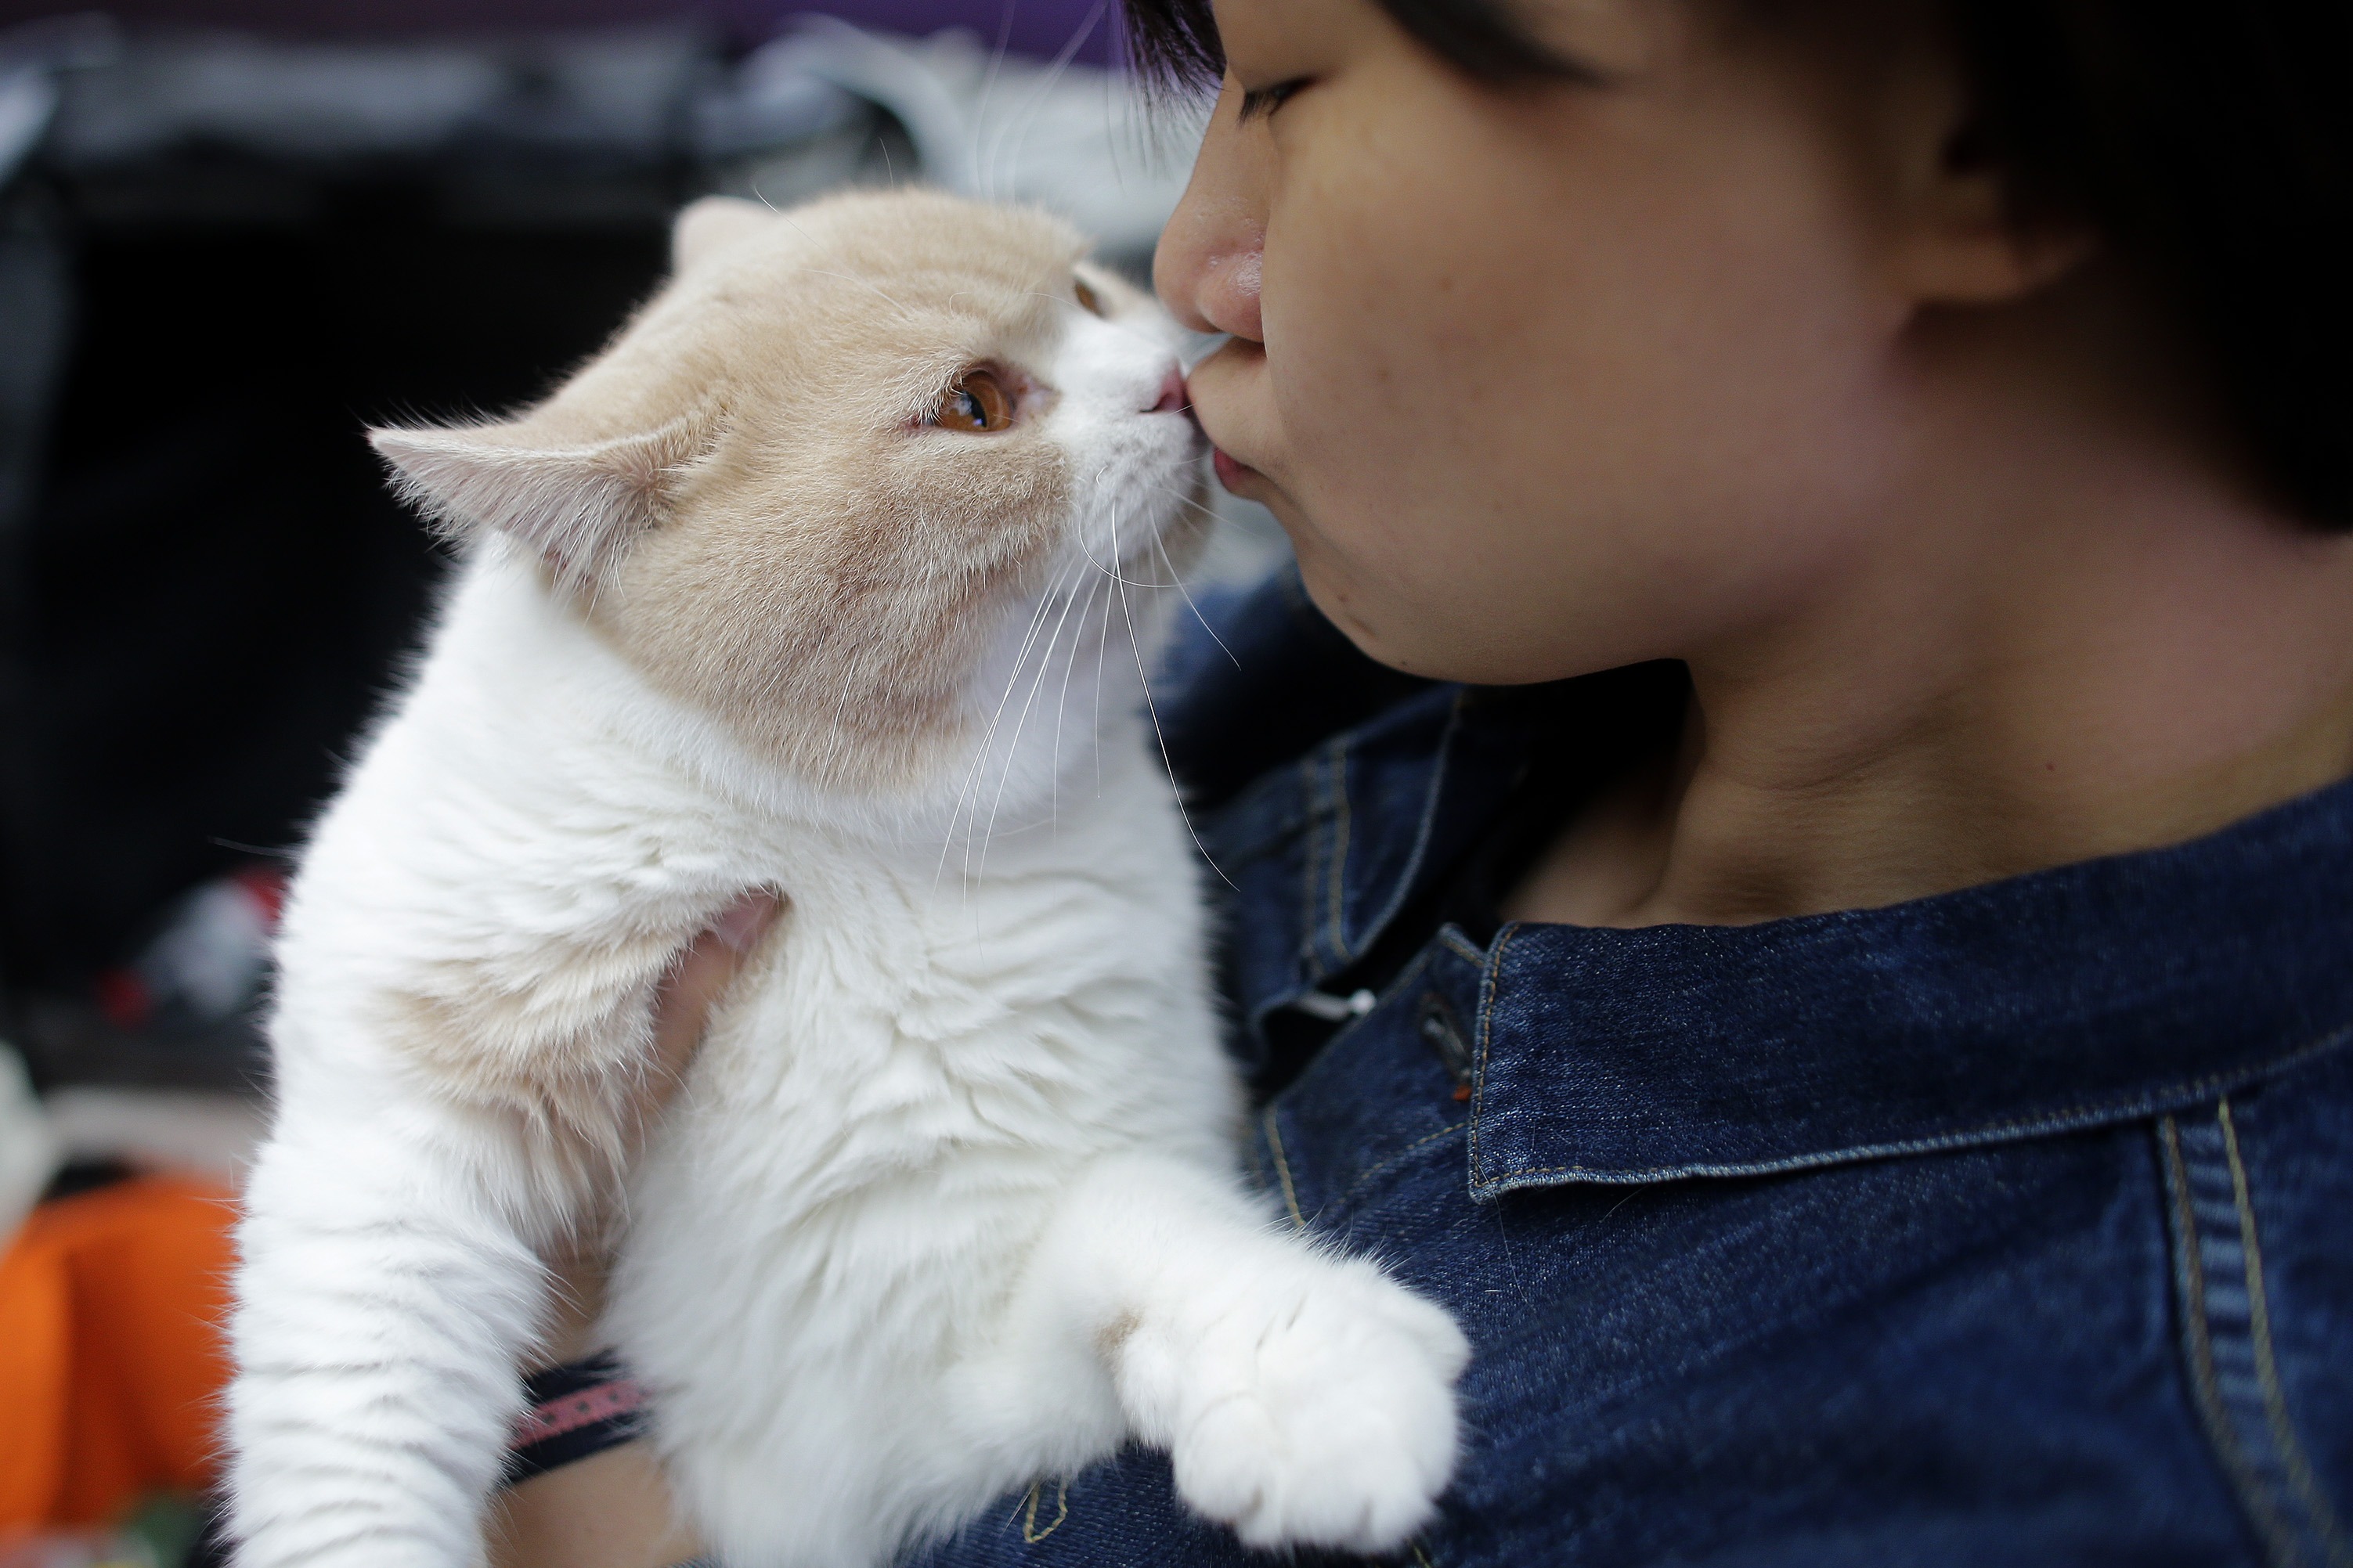 Cuddling Cats Keeps Them Healthy Say Scientists Which Means You